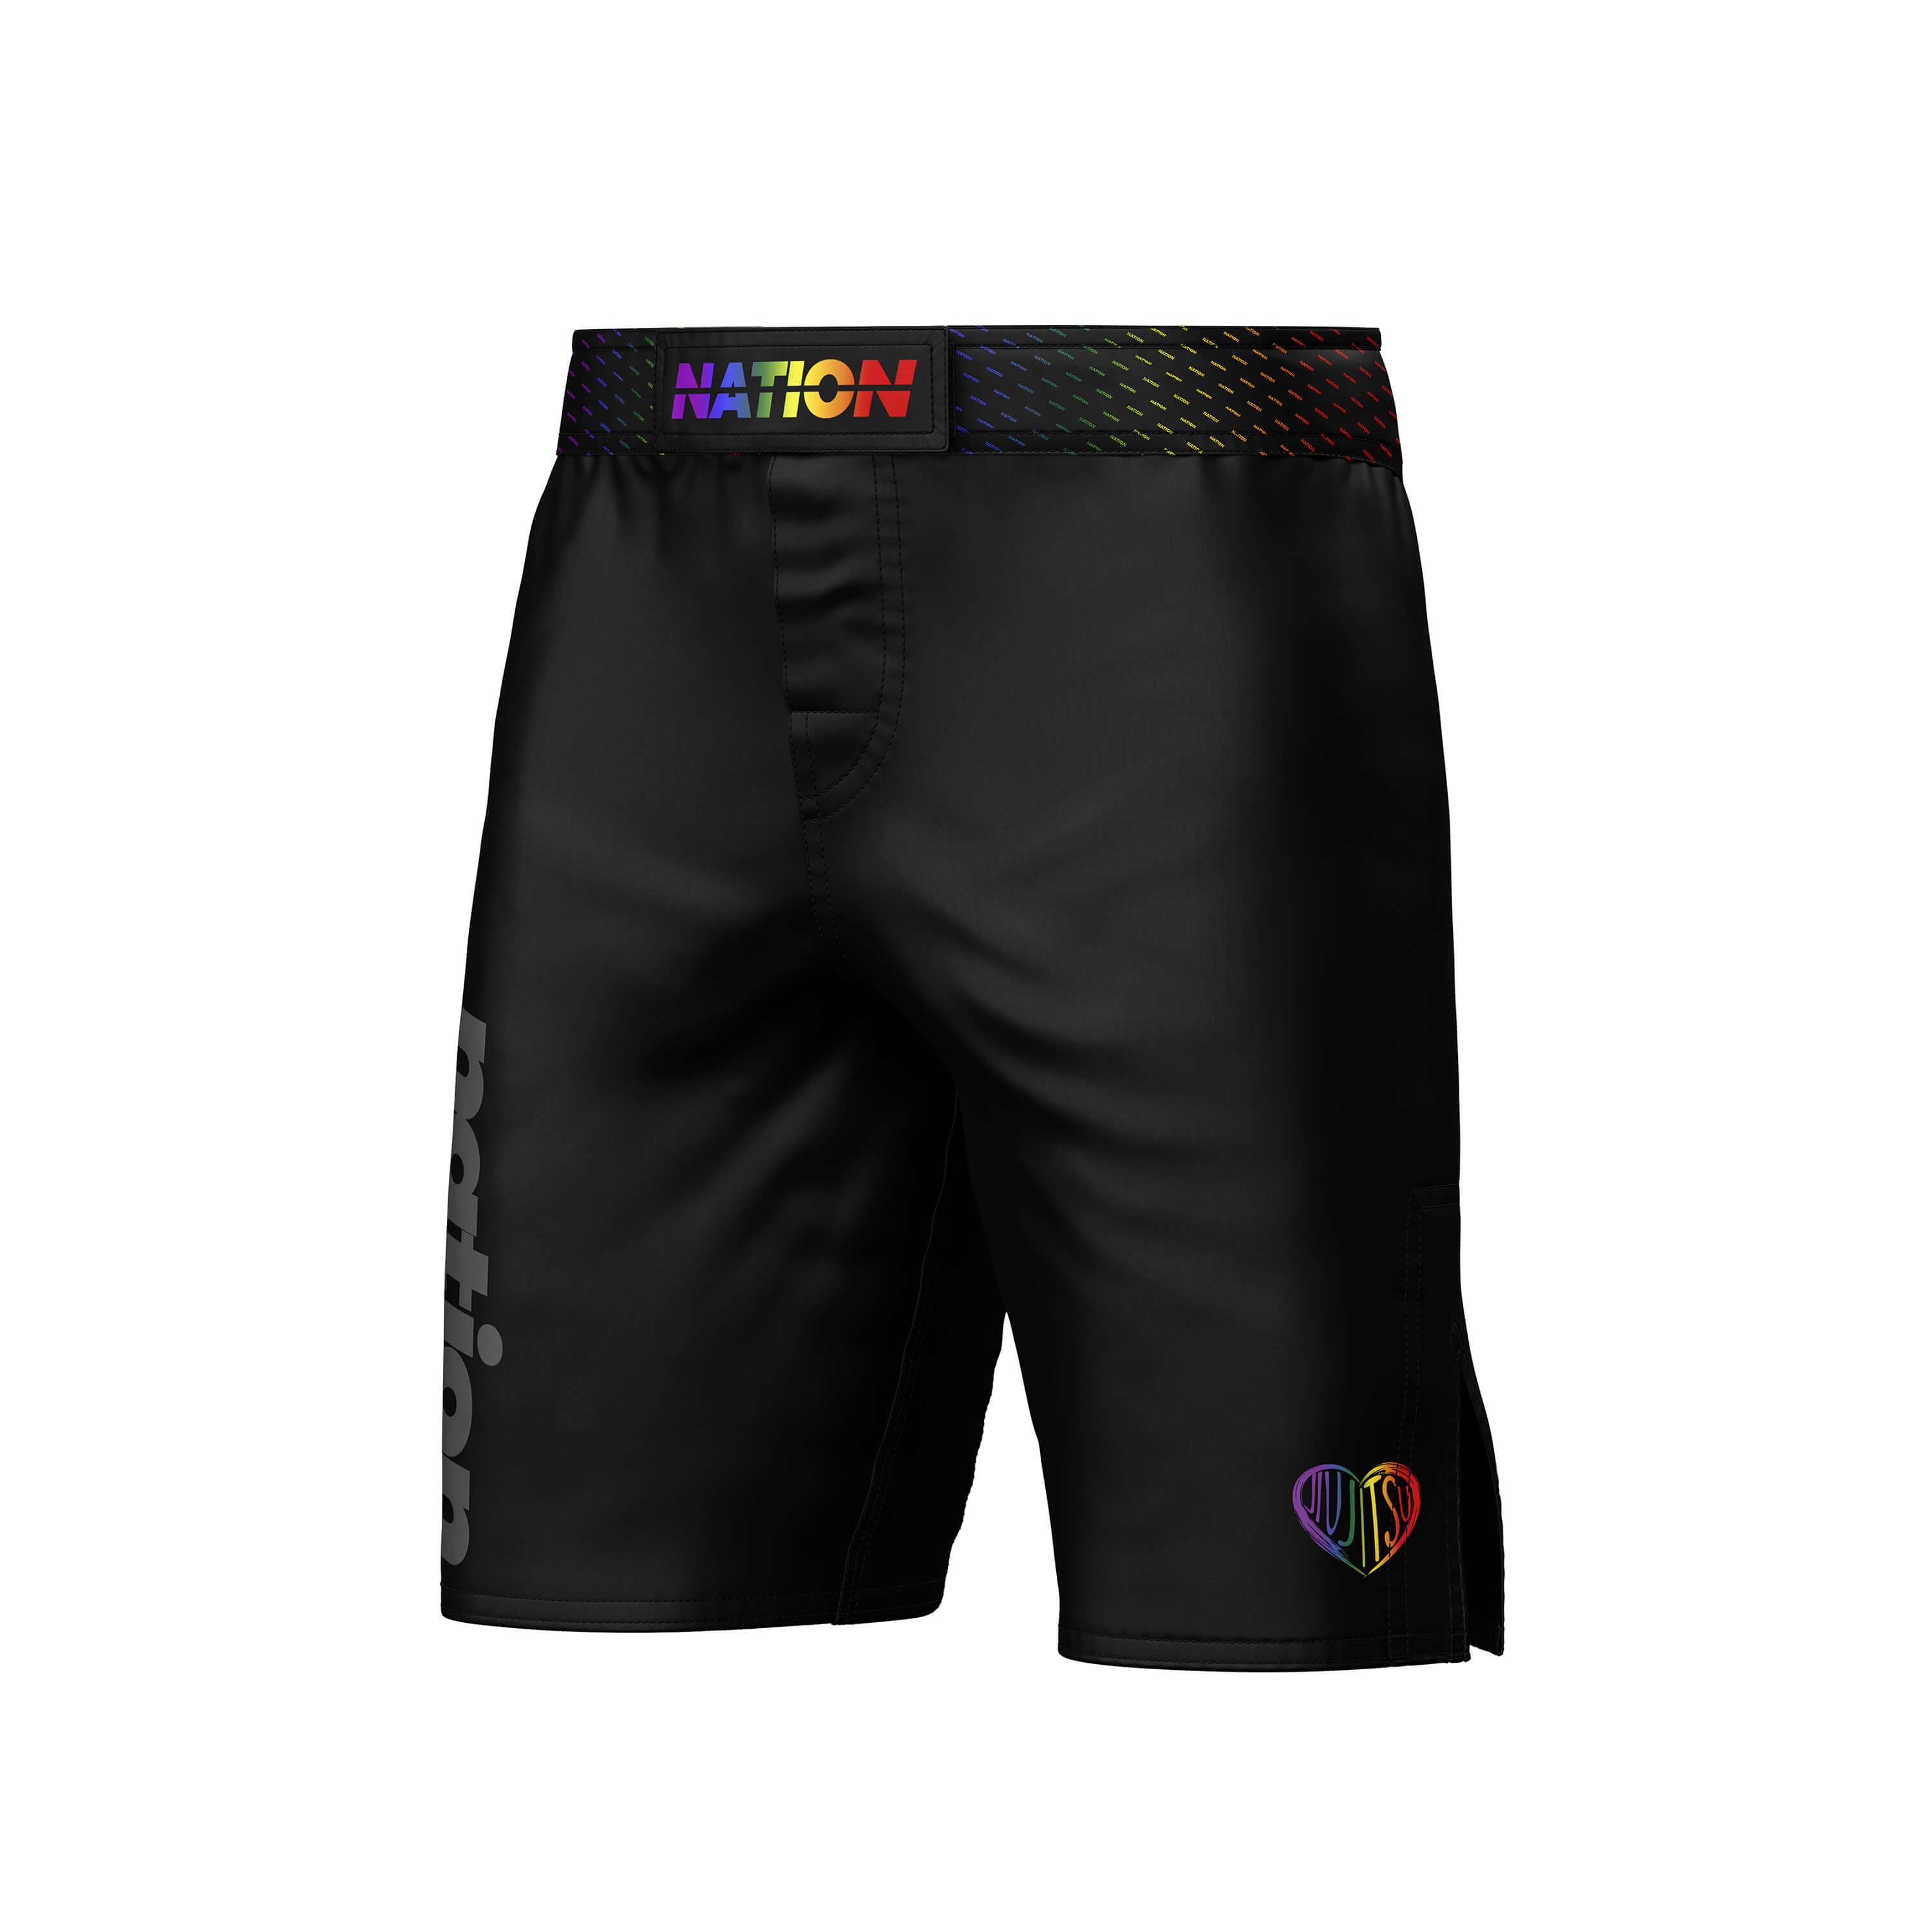 Roll with Pride V2 | Fight Shorts For Grappling, BJJ Wrestling and MMA | Nation Athletic Jiu JItsu